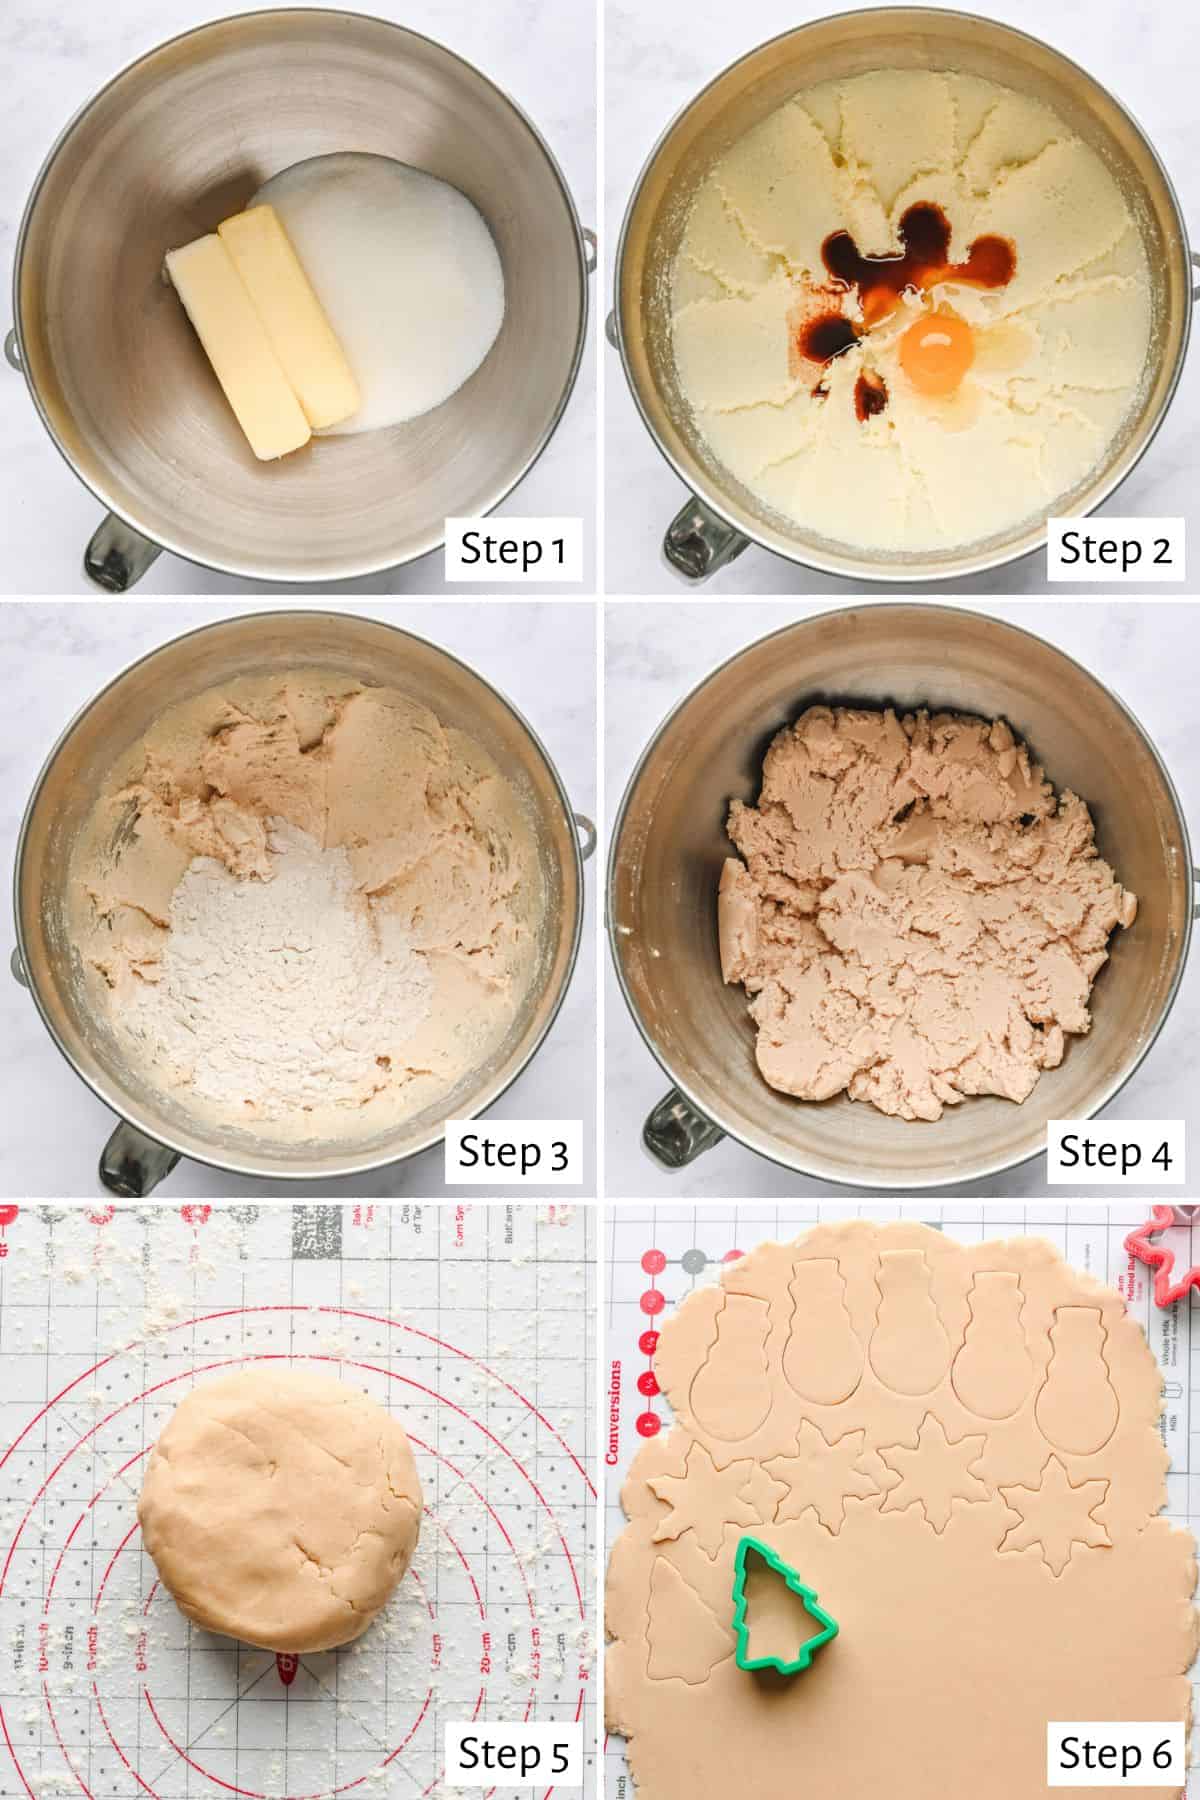 6 image collage making recipe: 1- butter and sugar in a bowl, 2- after creaming with egg and vanilla added, 3- after combining with dry ingredients added, 4- cookie dough after mixing, 5- dough on a silicone mat, 6-dough after rolling out with a cookie cutter pressing shapes out.